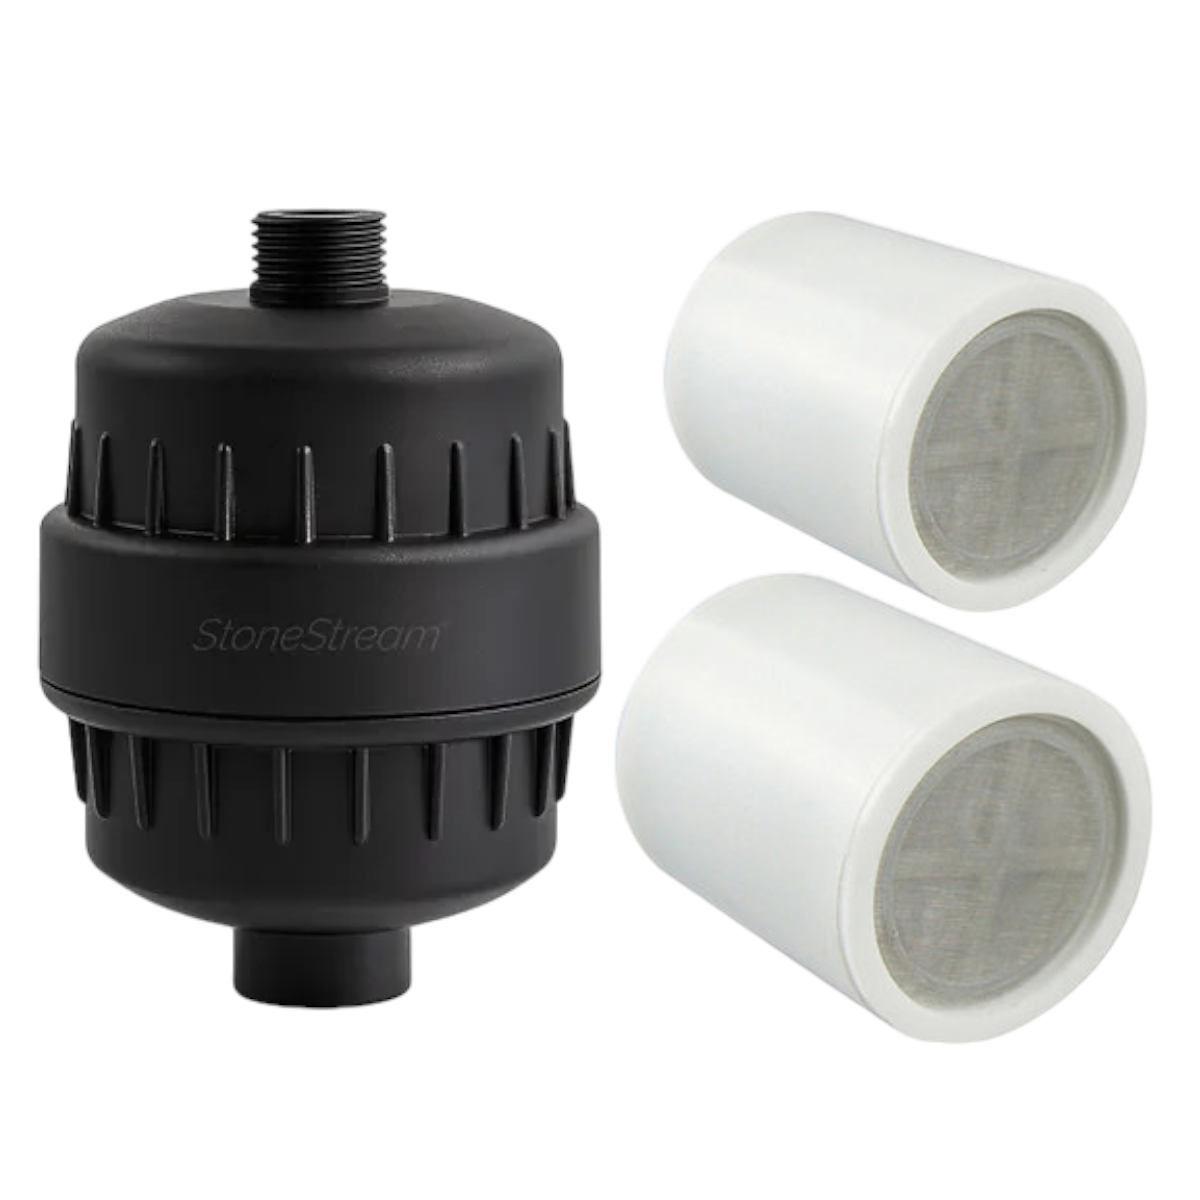 Black Shower Water Filter with Refill Cartridges